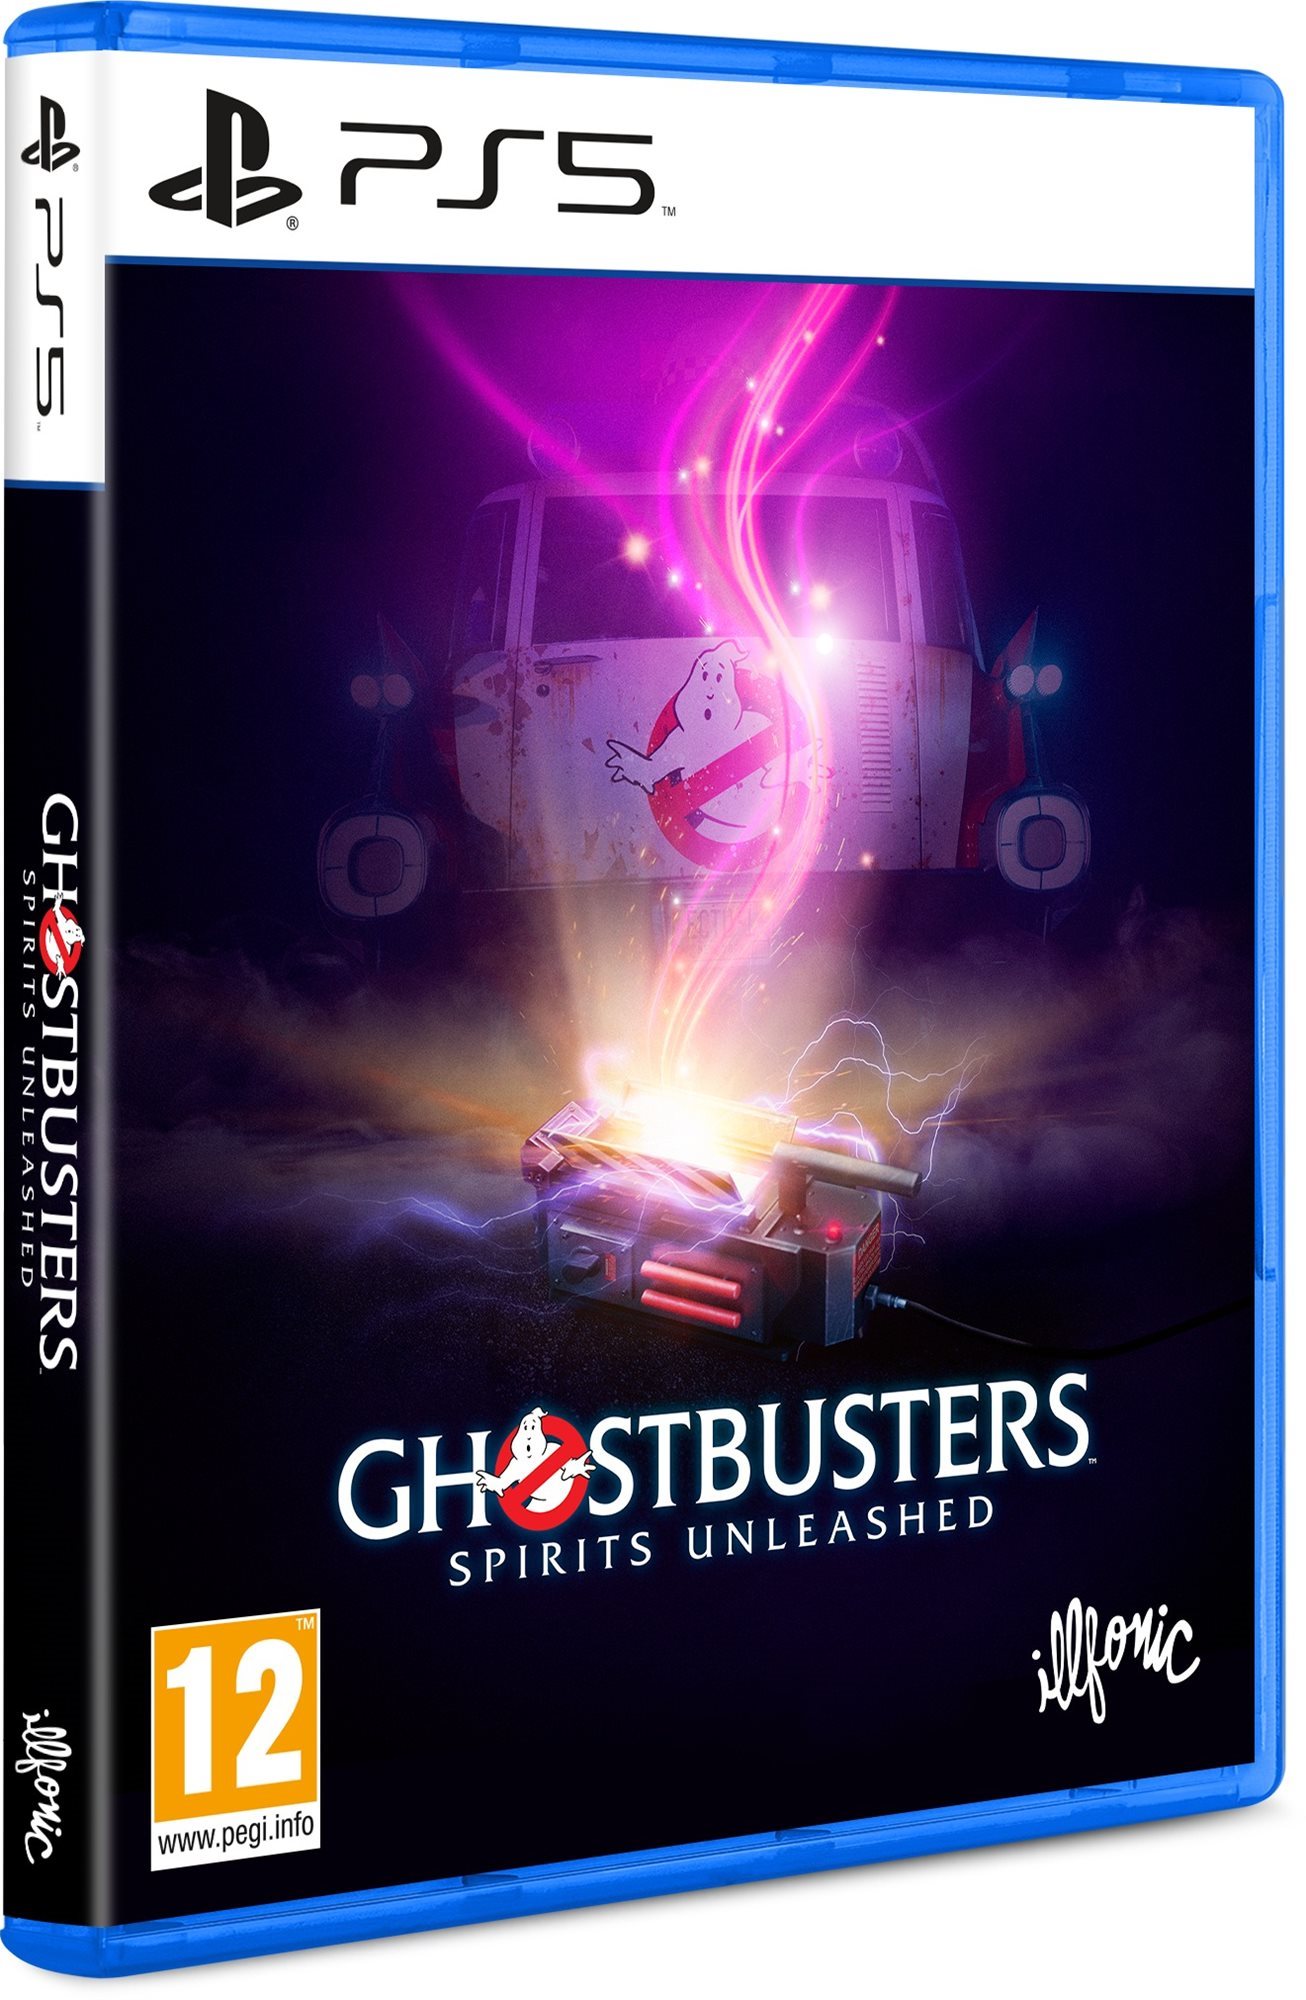 Ghostbusters: Spirits Unleashed - PS5